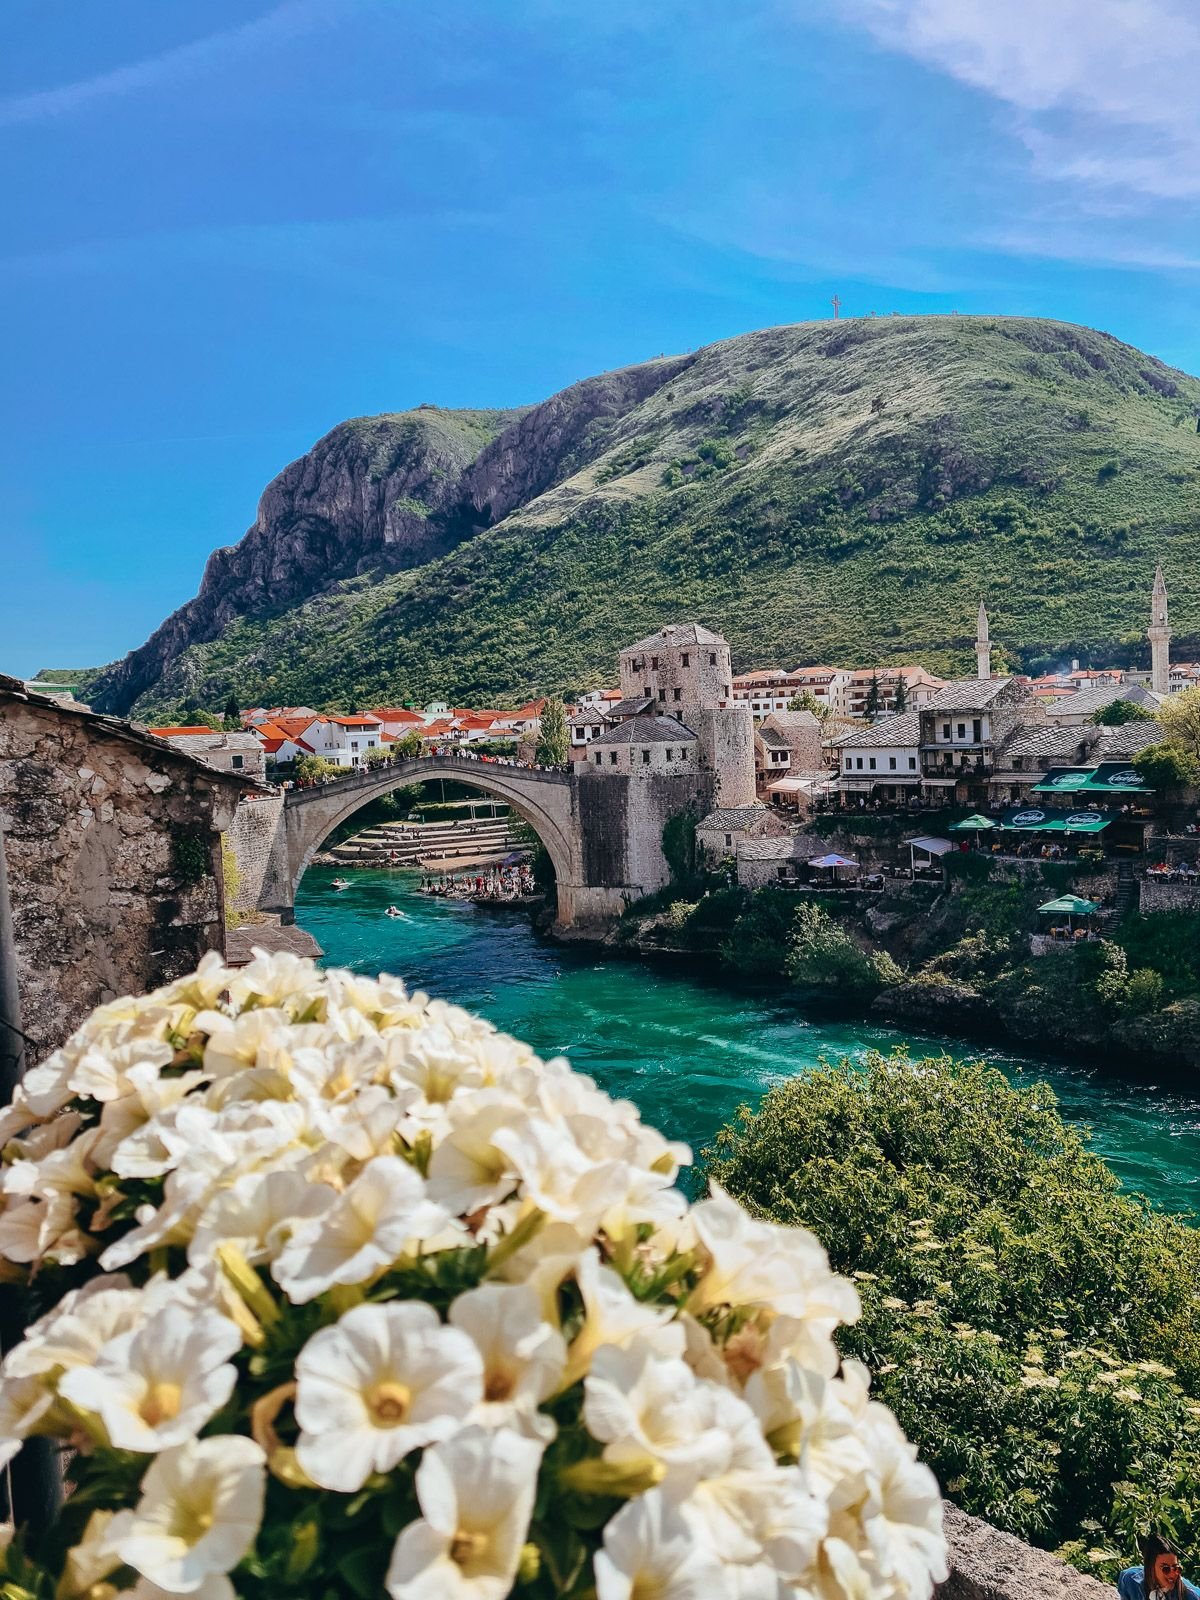 View of Mostar Bridge and Old Town in Bosnia and Herzegovina